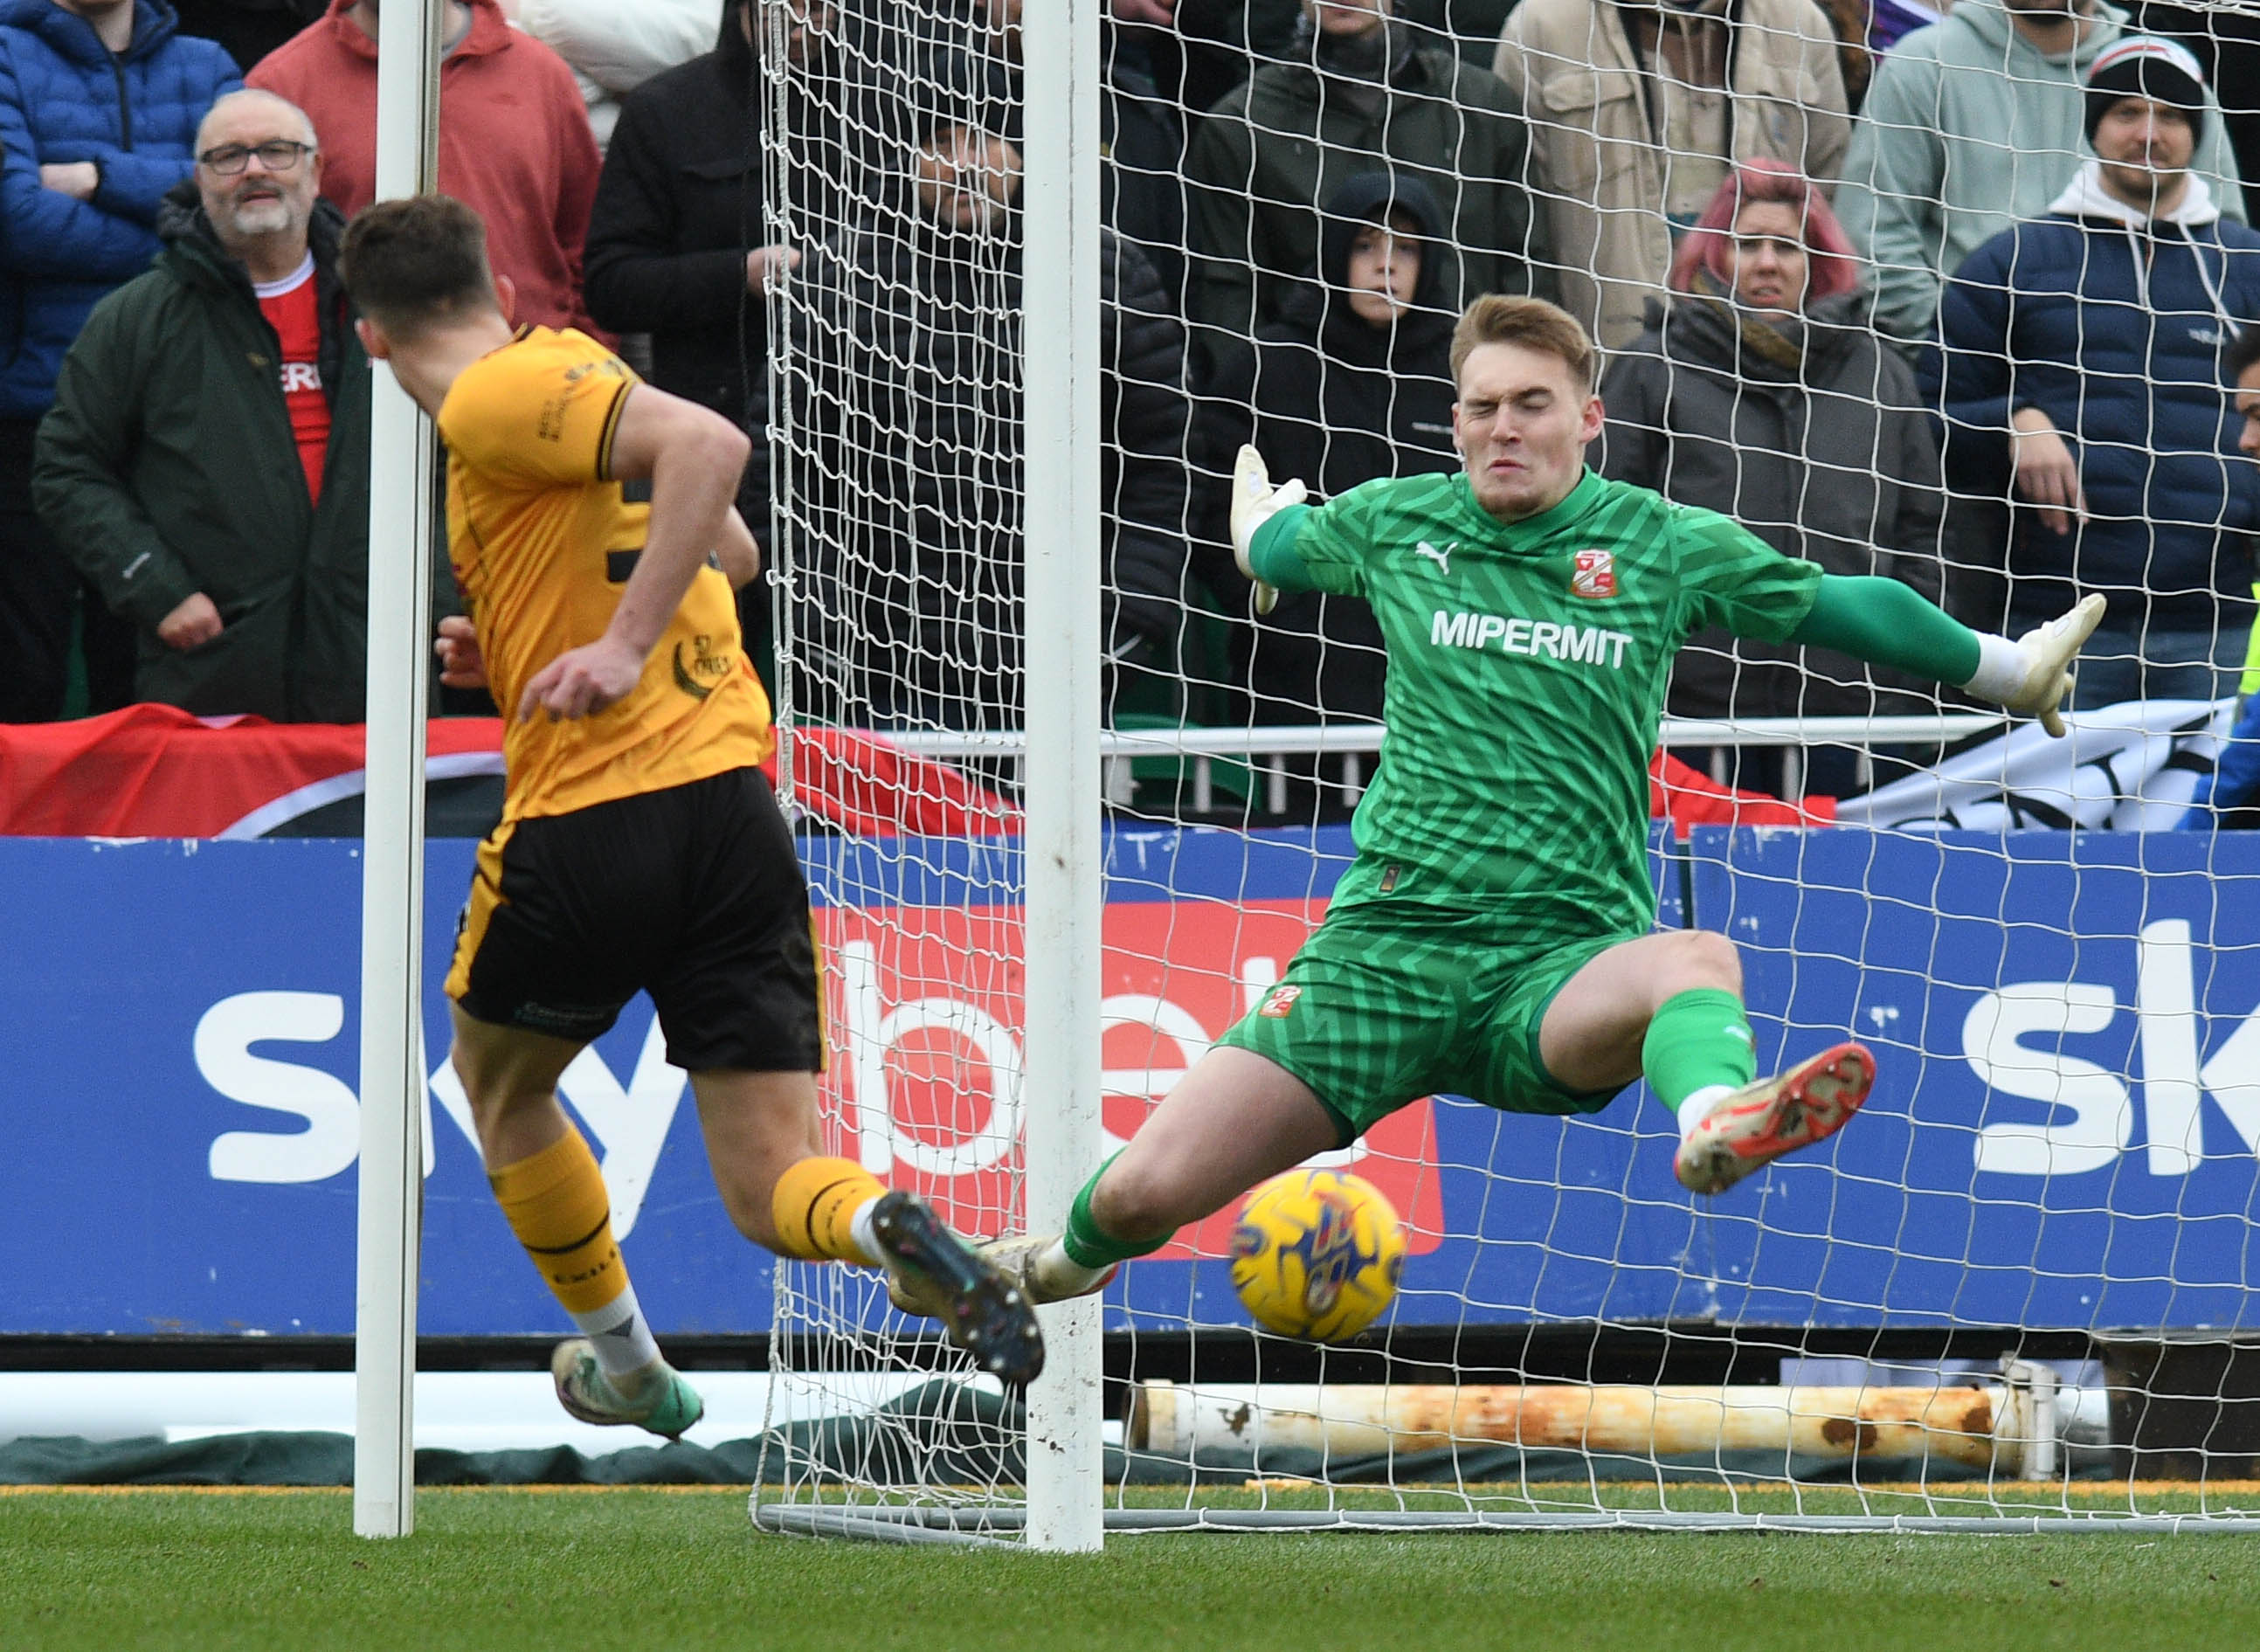 Gunning admits Swindon conceded 'two rubbish goals' in defeat at Newport County